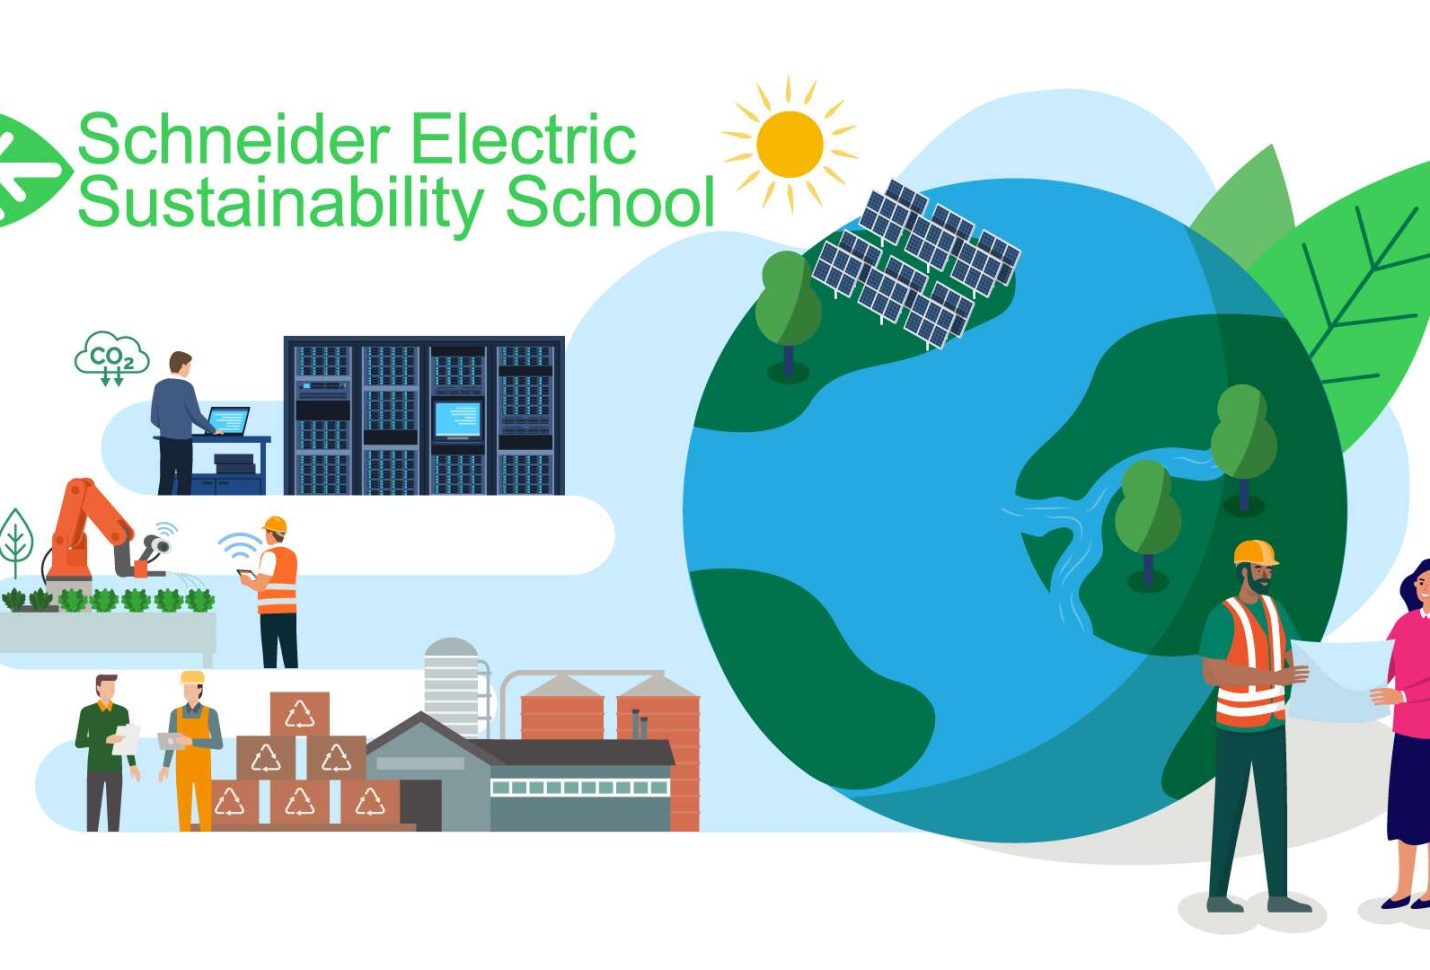 Schneider Electric Sustainability School is now open for enrollment to accelerate decarbonization